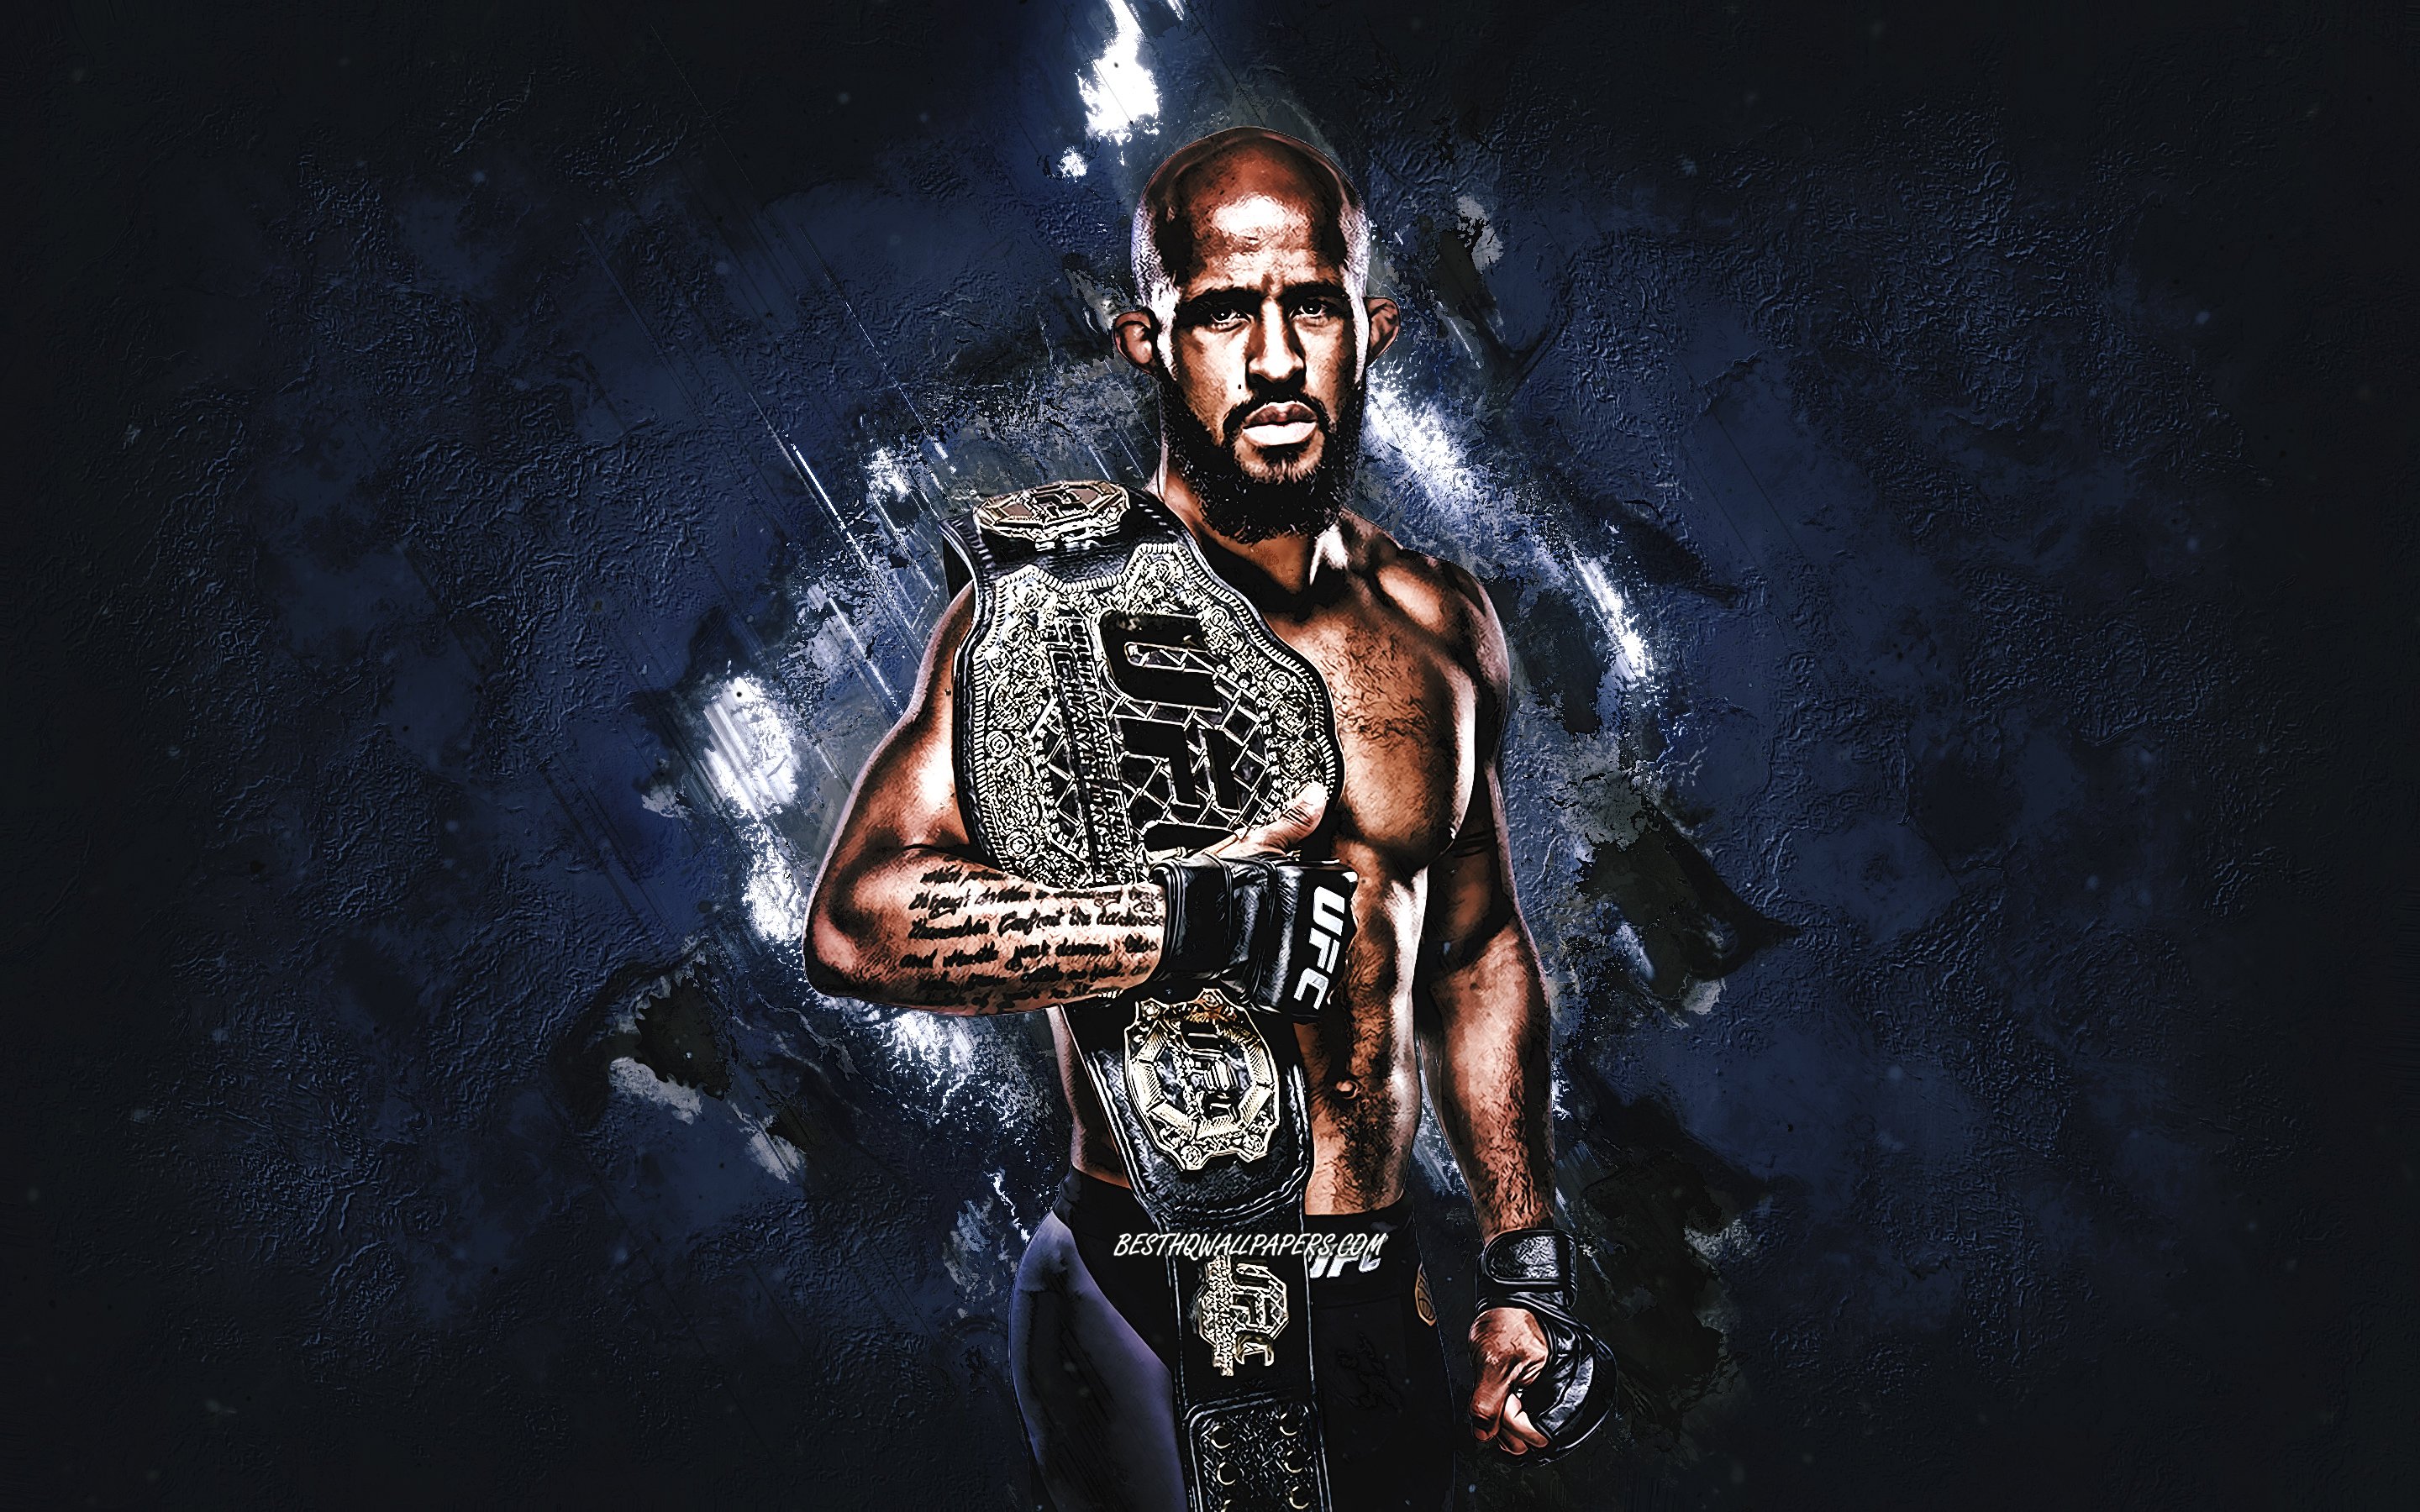 Download wallpaper Demetrious Johnson, UFC, Flyweight Champion, american fighter, portrait, blue stone background for desktop with resolution 2880x1800. High Quality HD picture wallpaper